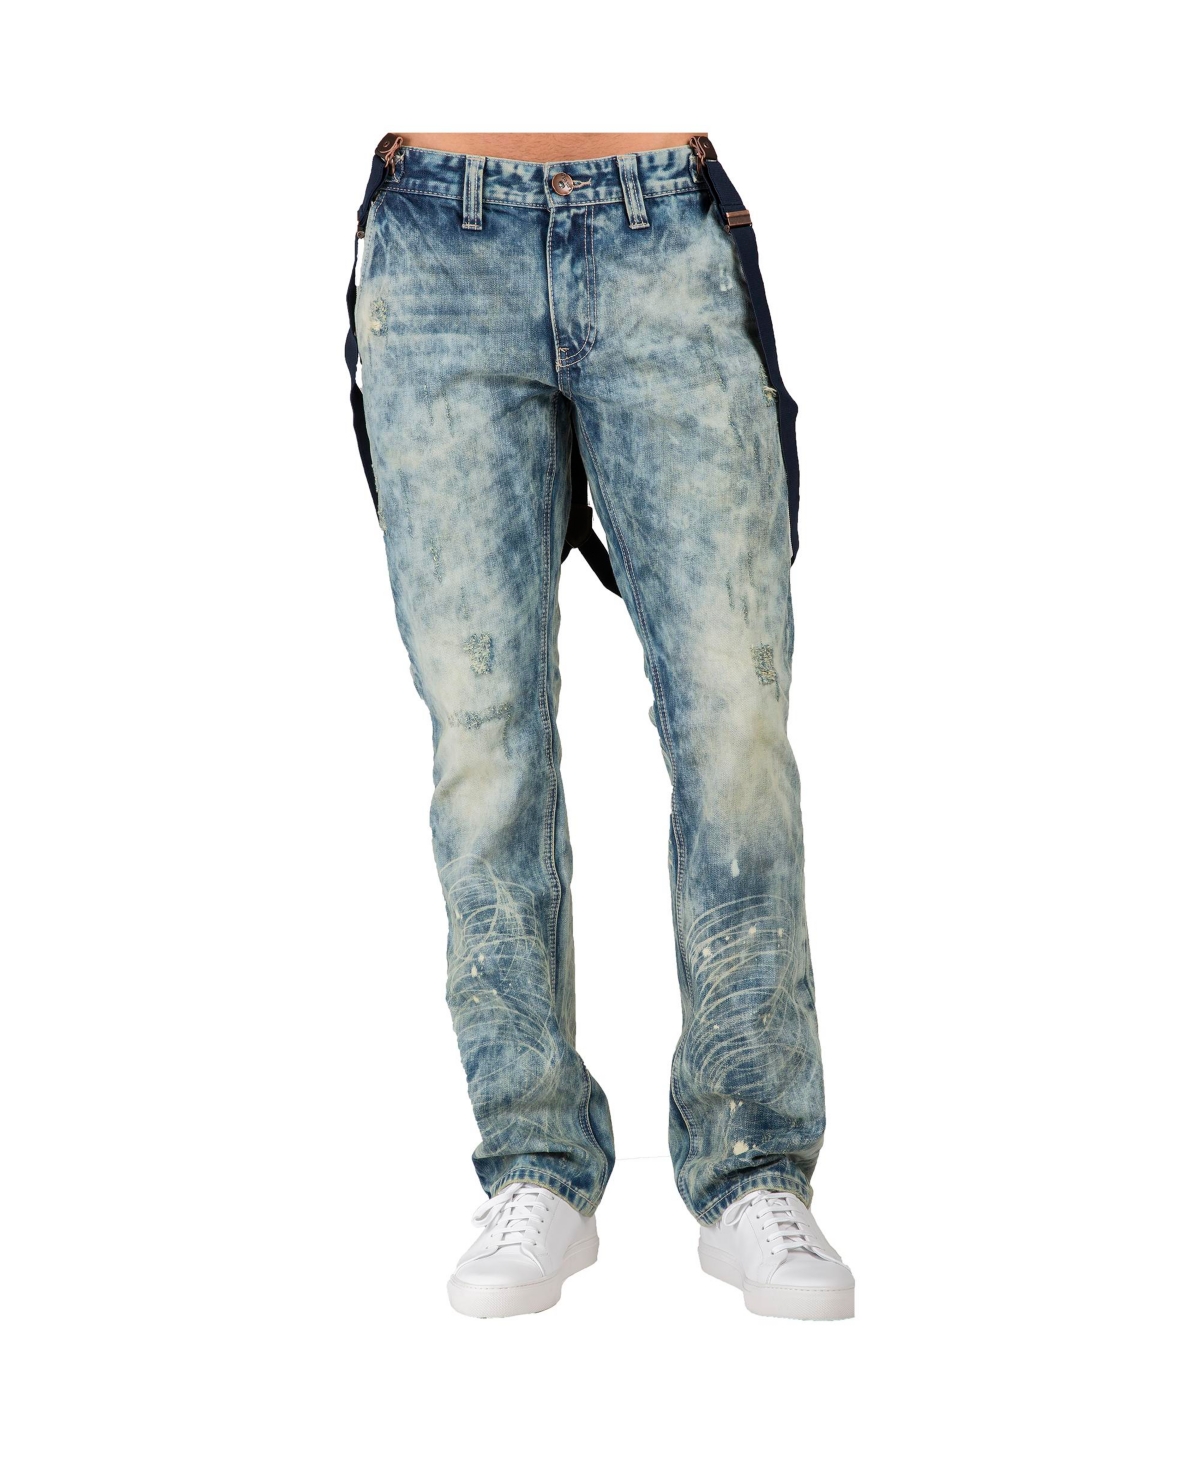 Men's Slim Straight Premium Jeans Distressed Acid Washed with Suspenders - Twister